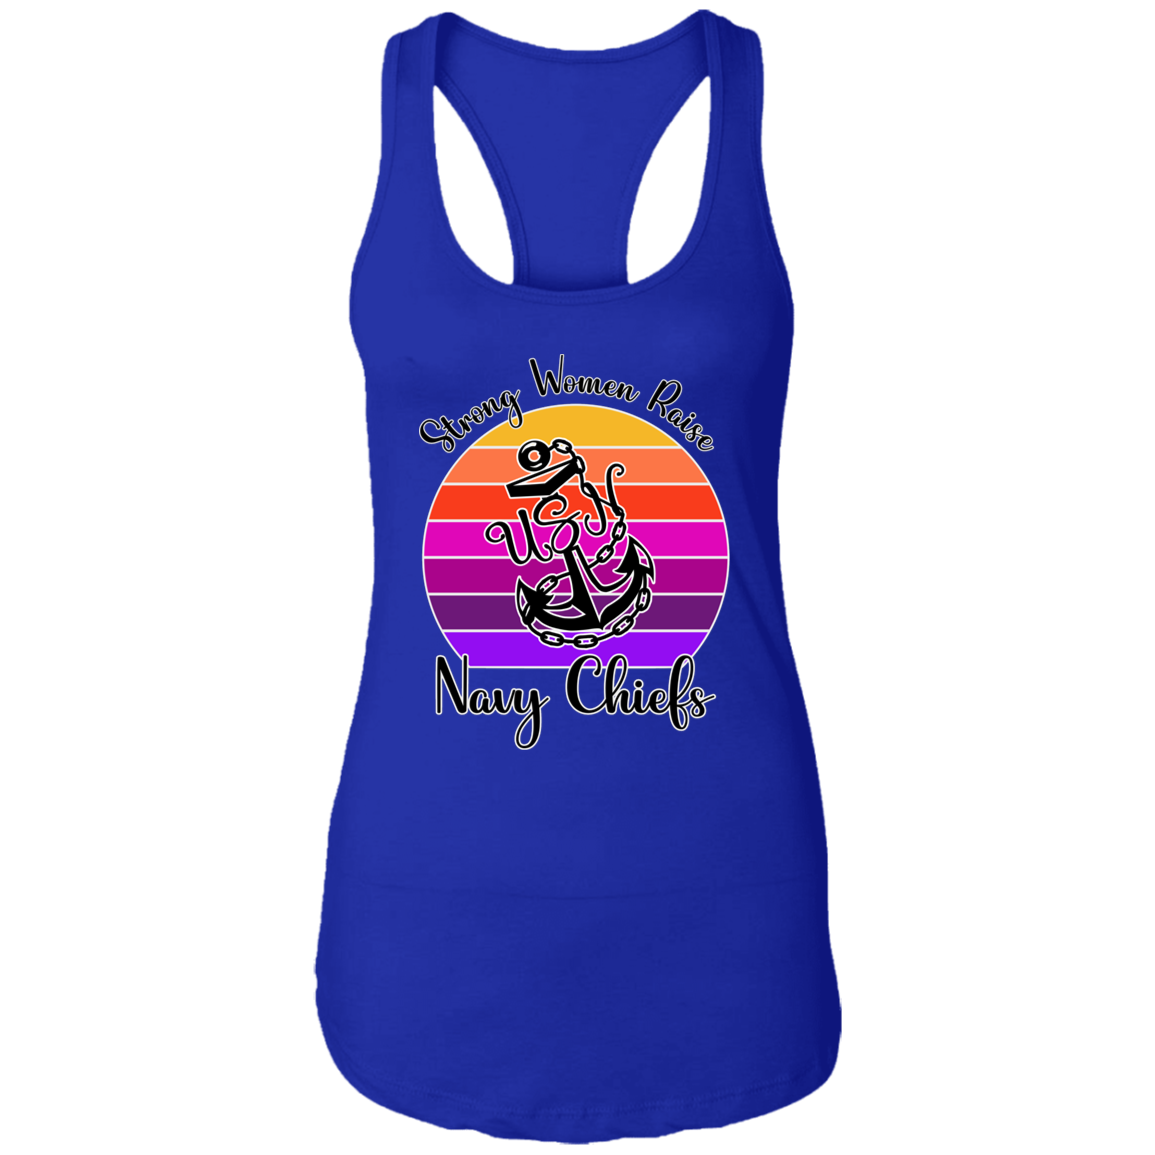 Strong Navy Mom Ladies Ideal Racerback Tank